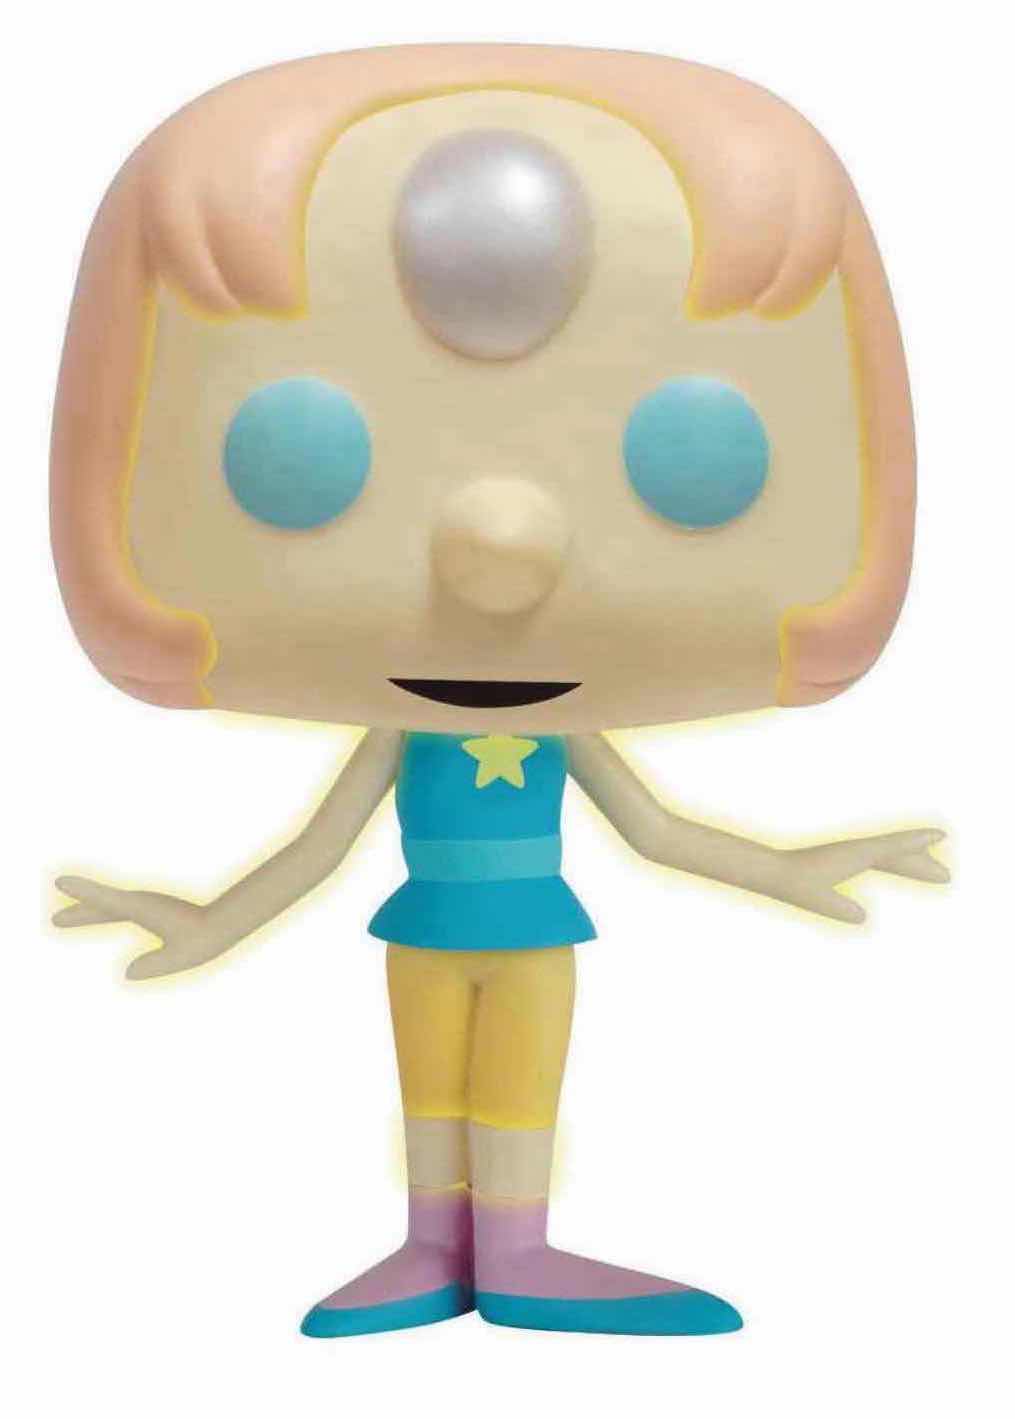 Photo 2 of NEW FUNKO POP! ANIMATION VINYL FIGURE 2-PACK, HOT TOPIC EXCLUSIVE STEVEN UNIVERSE #88 PEARL & AAA ANIME EXCLUSIVE ONE PIECE #1016 TRAFALGAR LAW